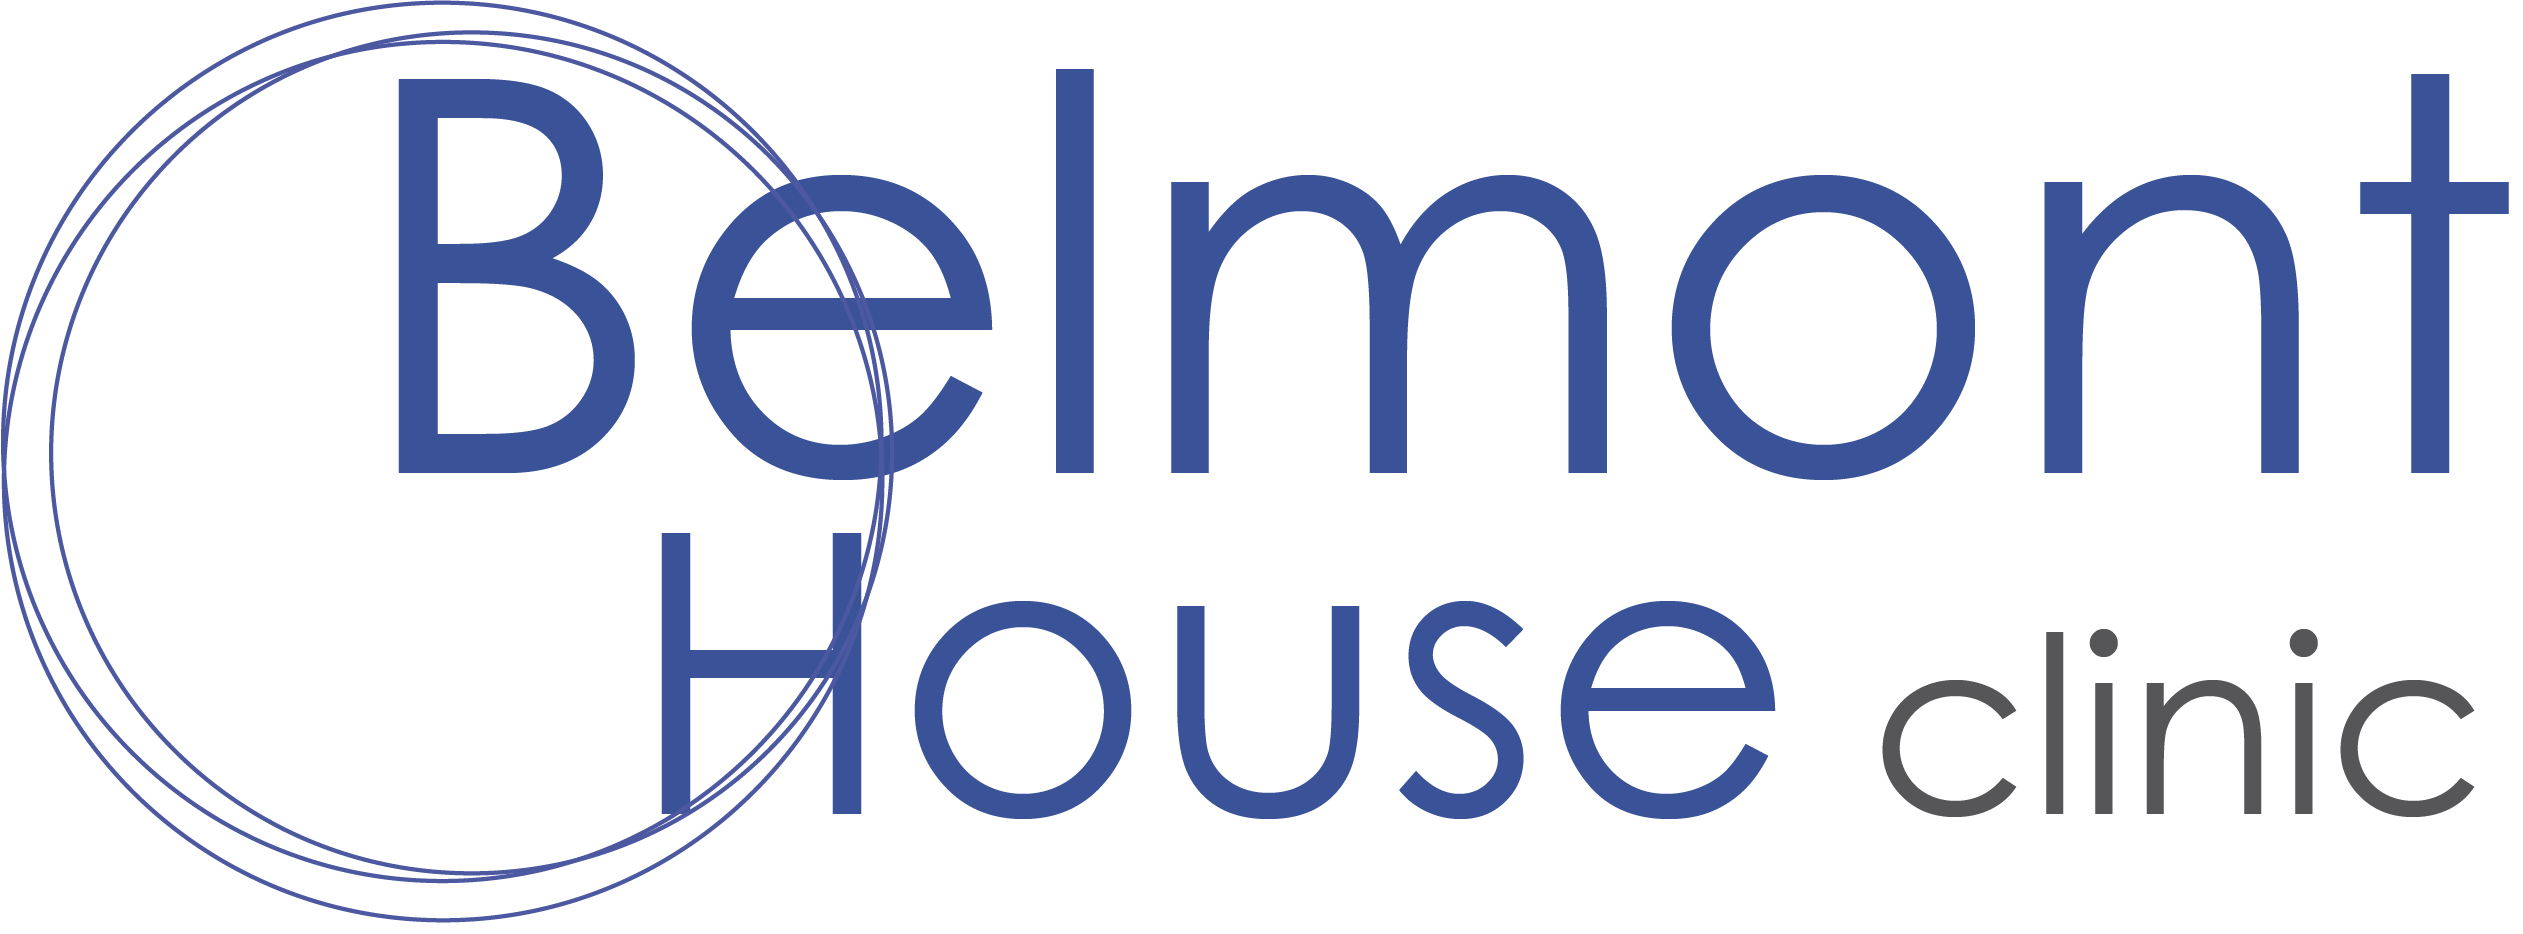 Belmont House Clinic